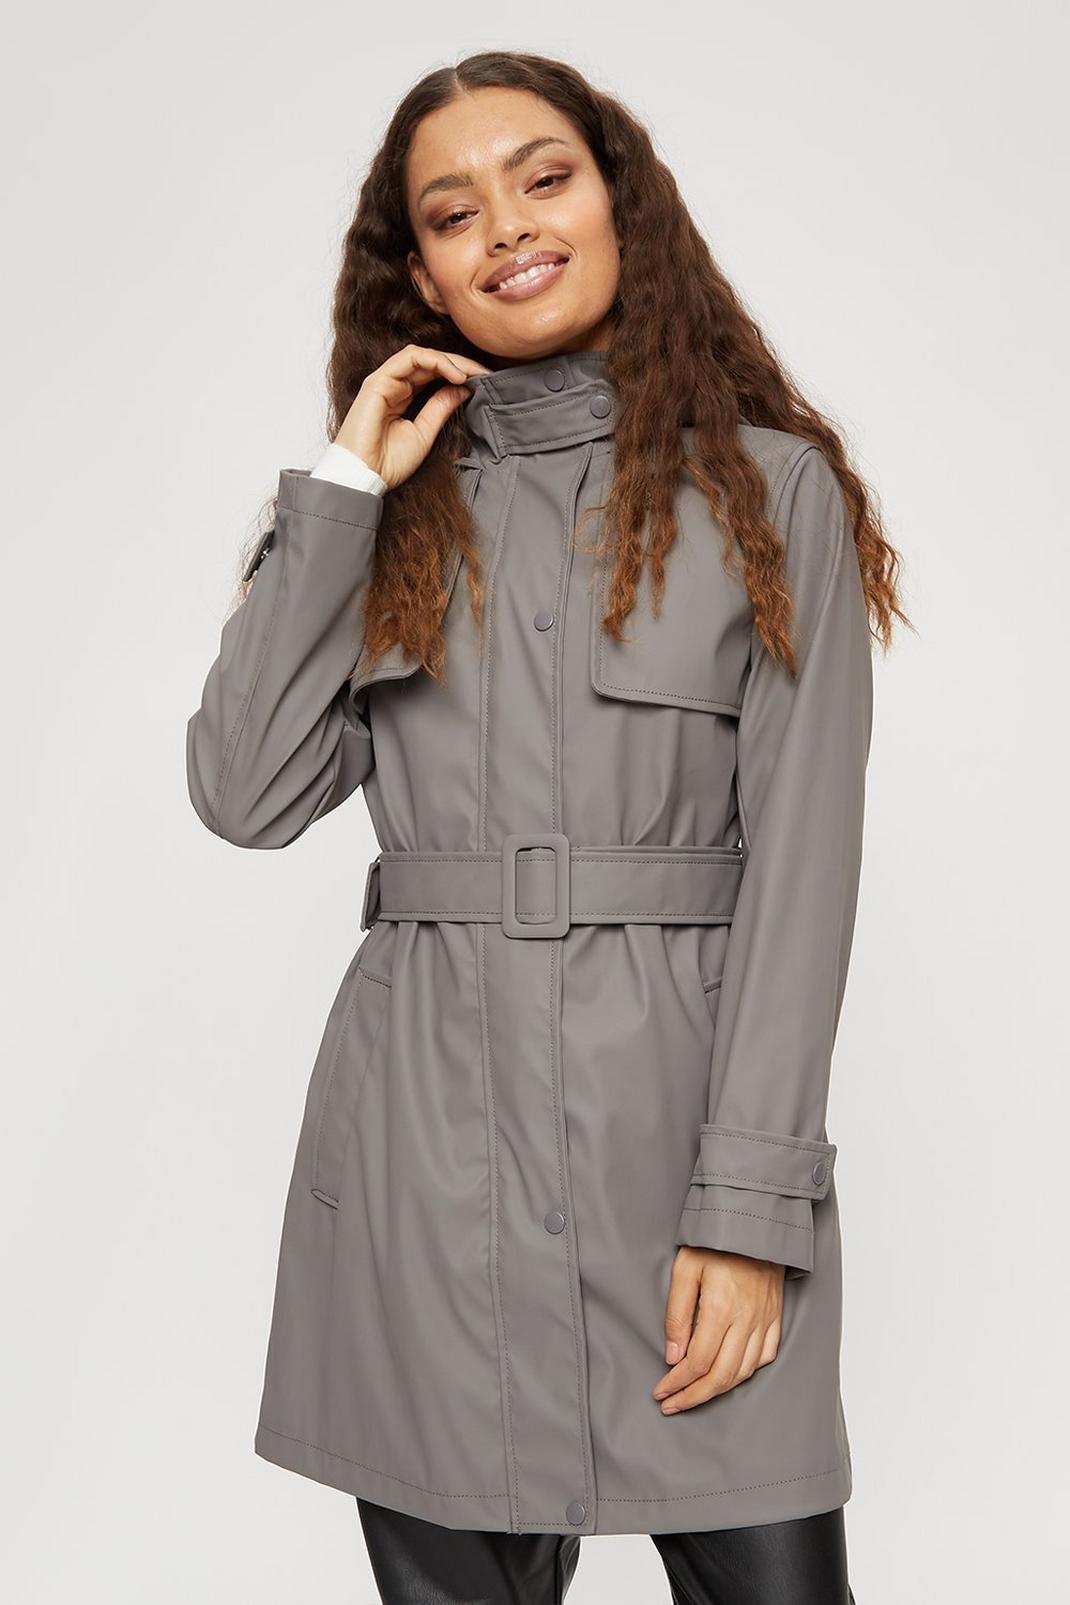 Charcoal Petite Lined Belted Raincoat image number 1